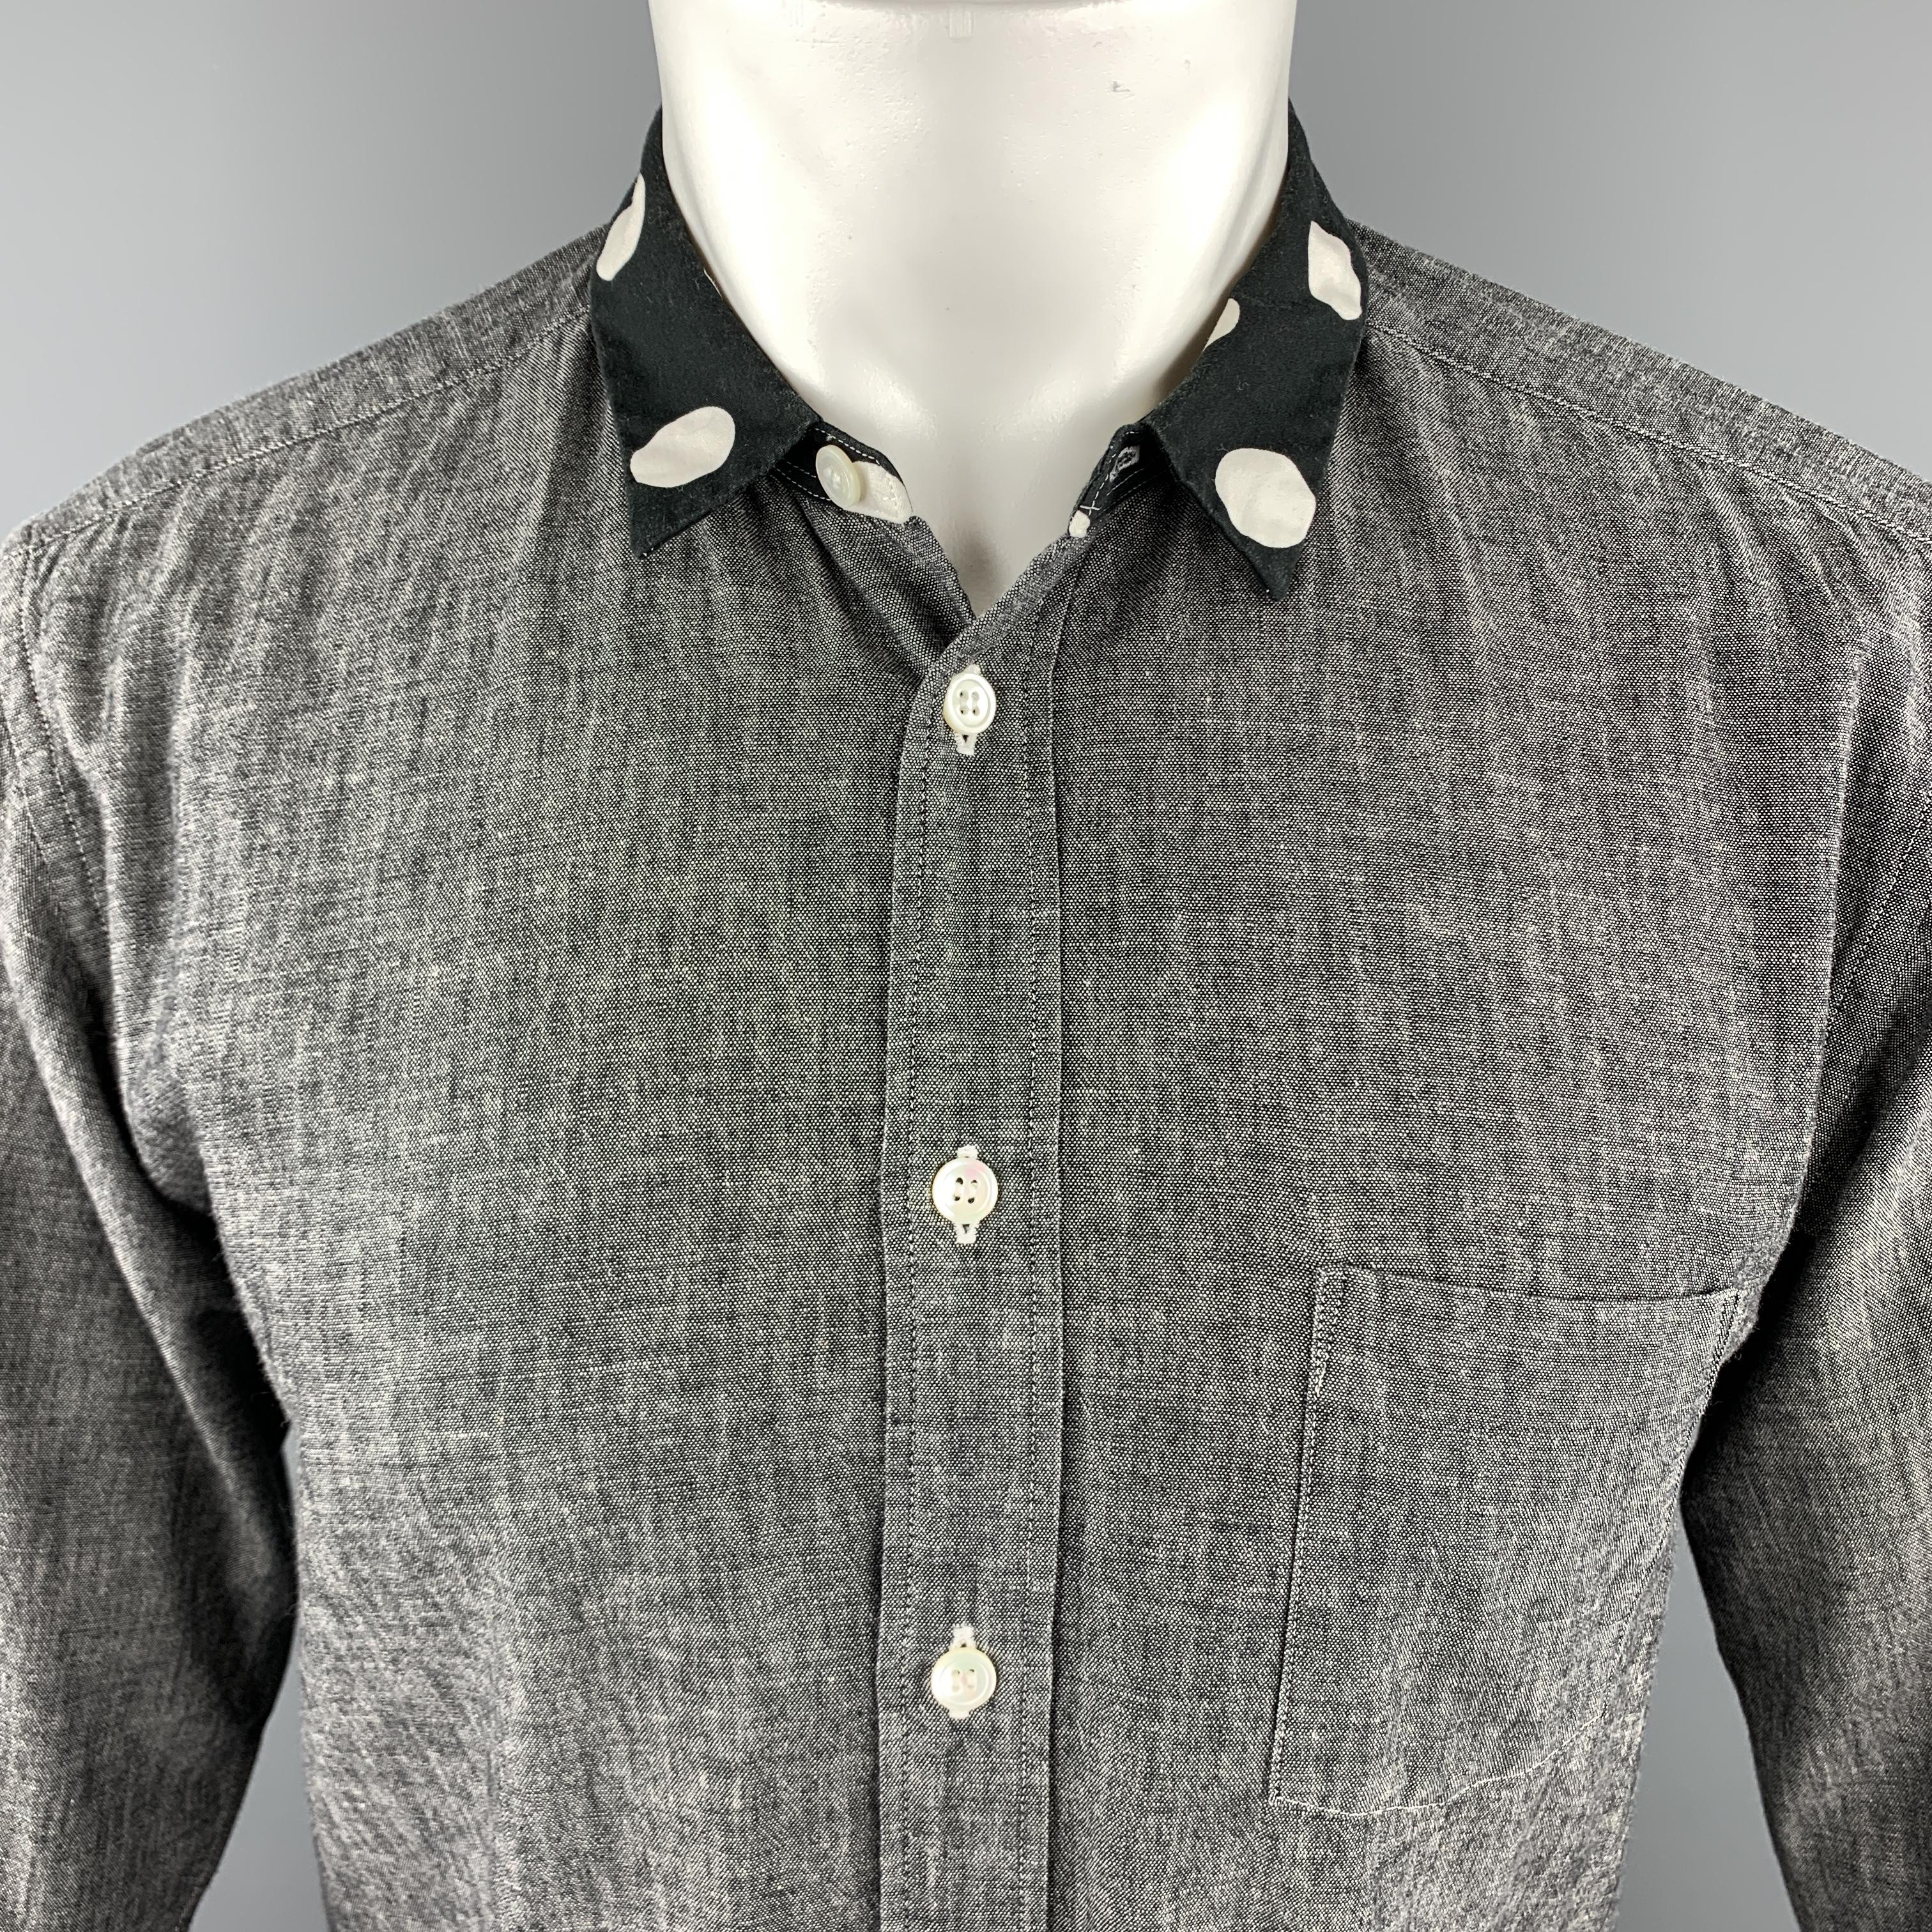 COMME des GARCONS HOMME PLUS long sleeve shirt comes in a solid gray cotton material, with a polka dots collar and cuffs, a patch pocket, and buttoned cuffs. Made in Japan.

Very Good Pre-Owned Condition.
Marked: XS  AD2011

Measurements:

Shoulder: